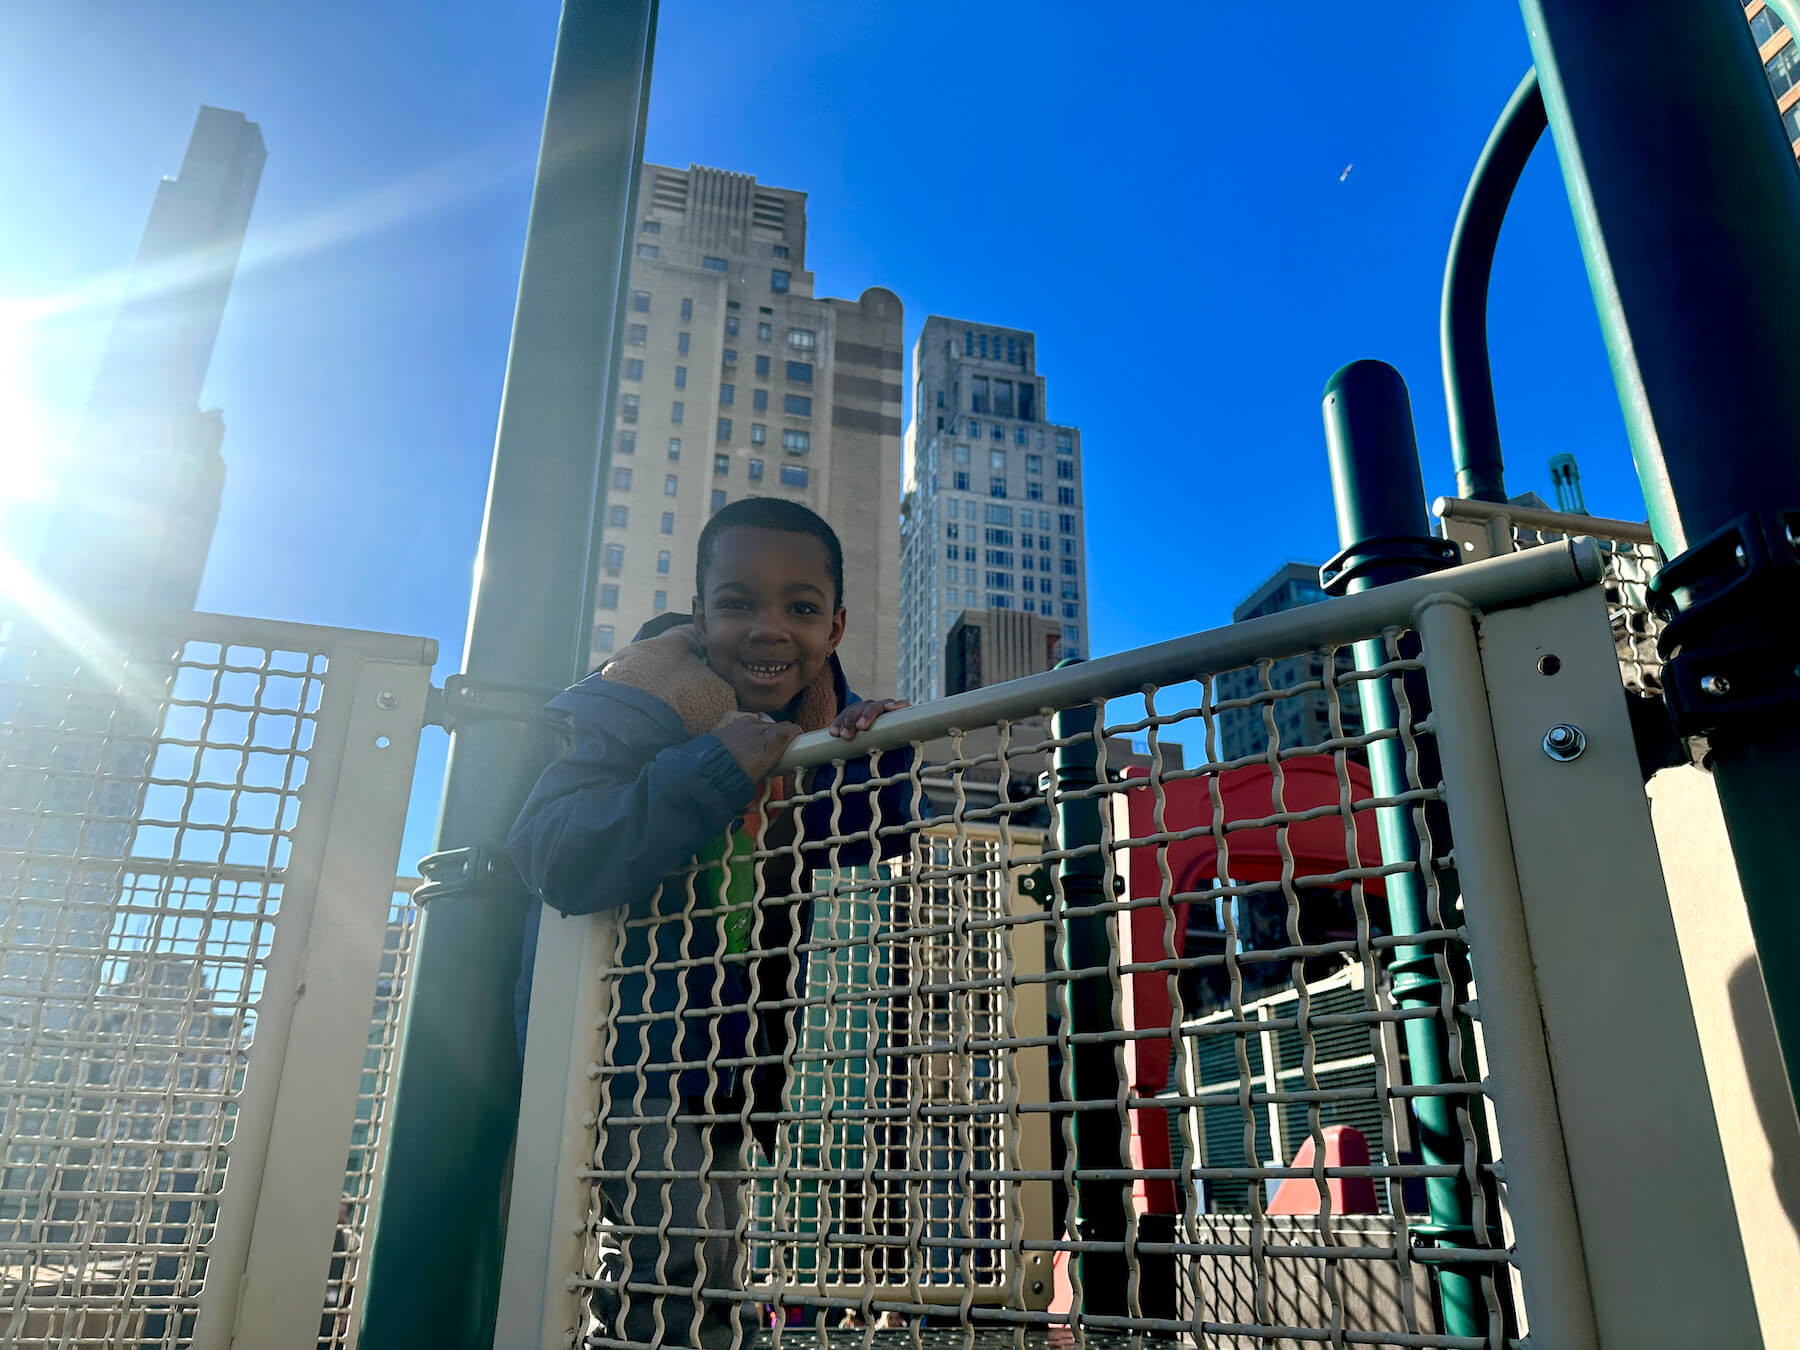 Ethical Culture Fieldston School student poses for a photo on the Ethical Culture rooftop